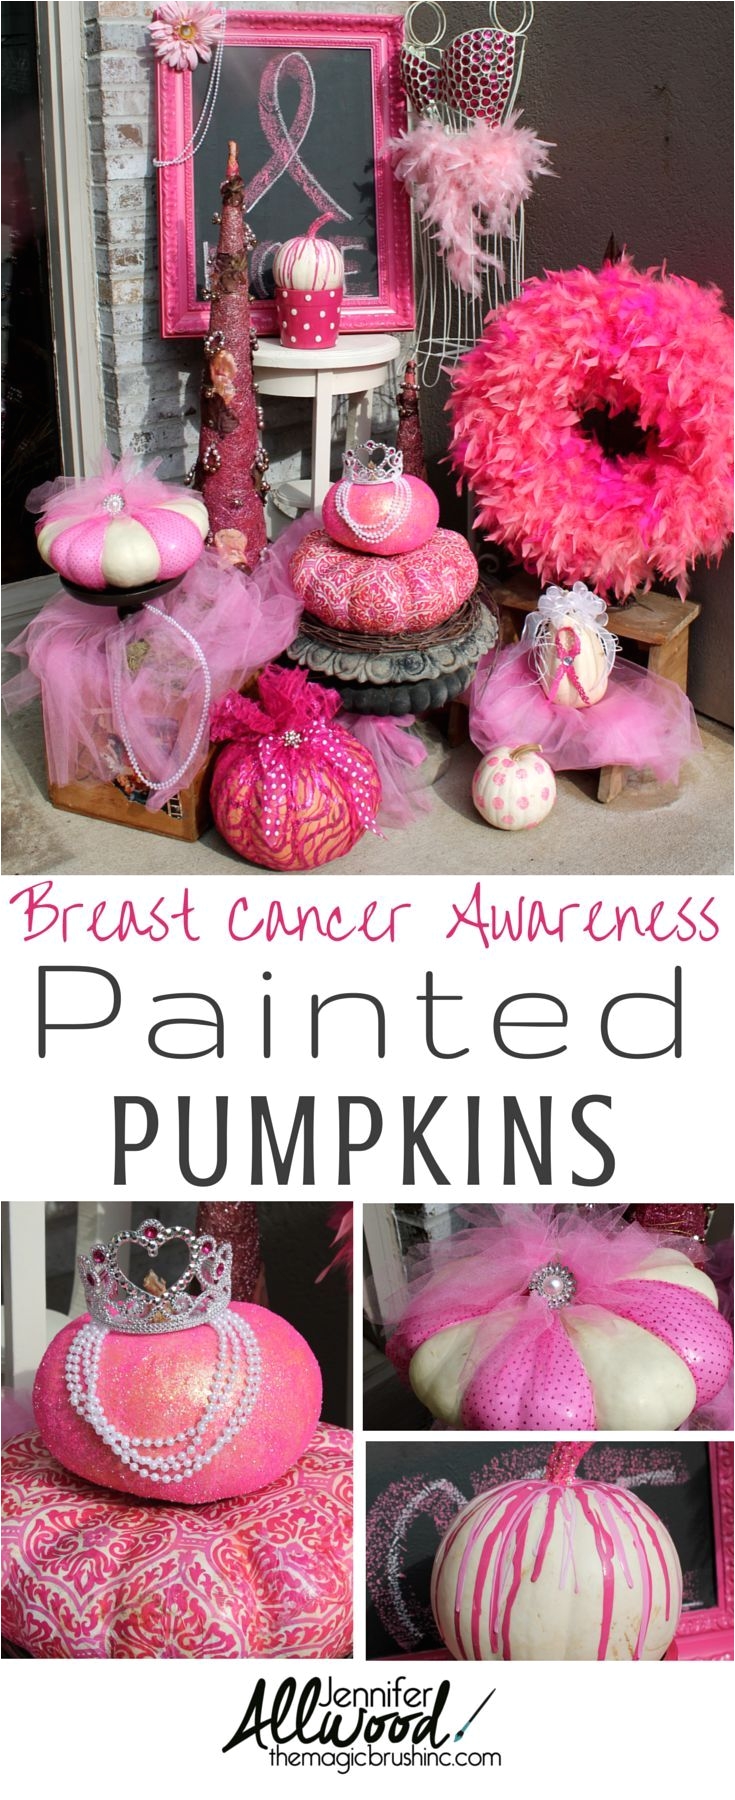 paint a pink pumpkin for october s breast cancer awareness month more fall decorating ideas and